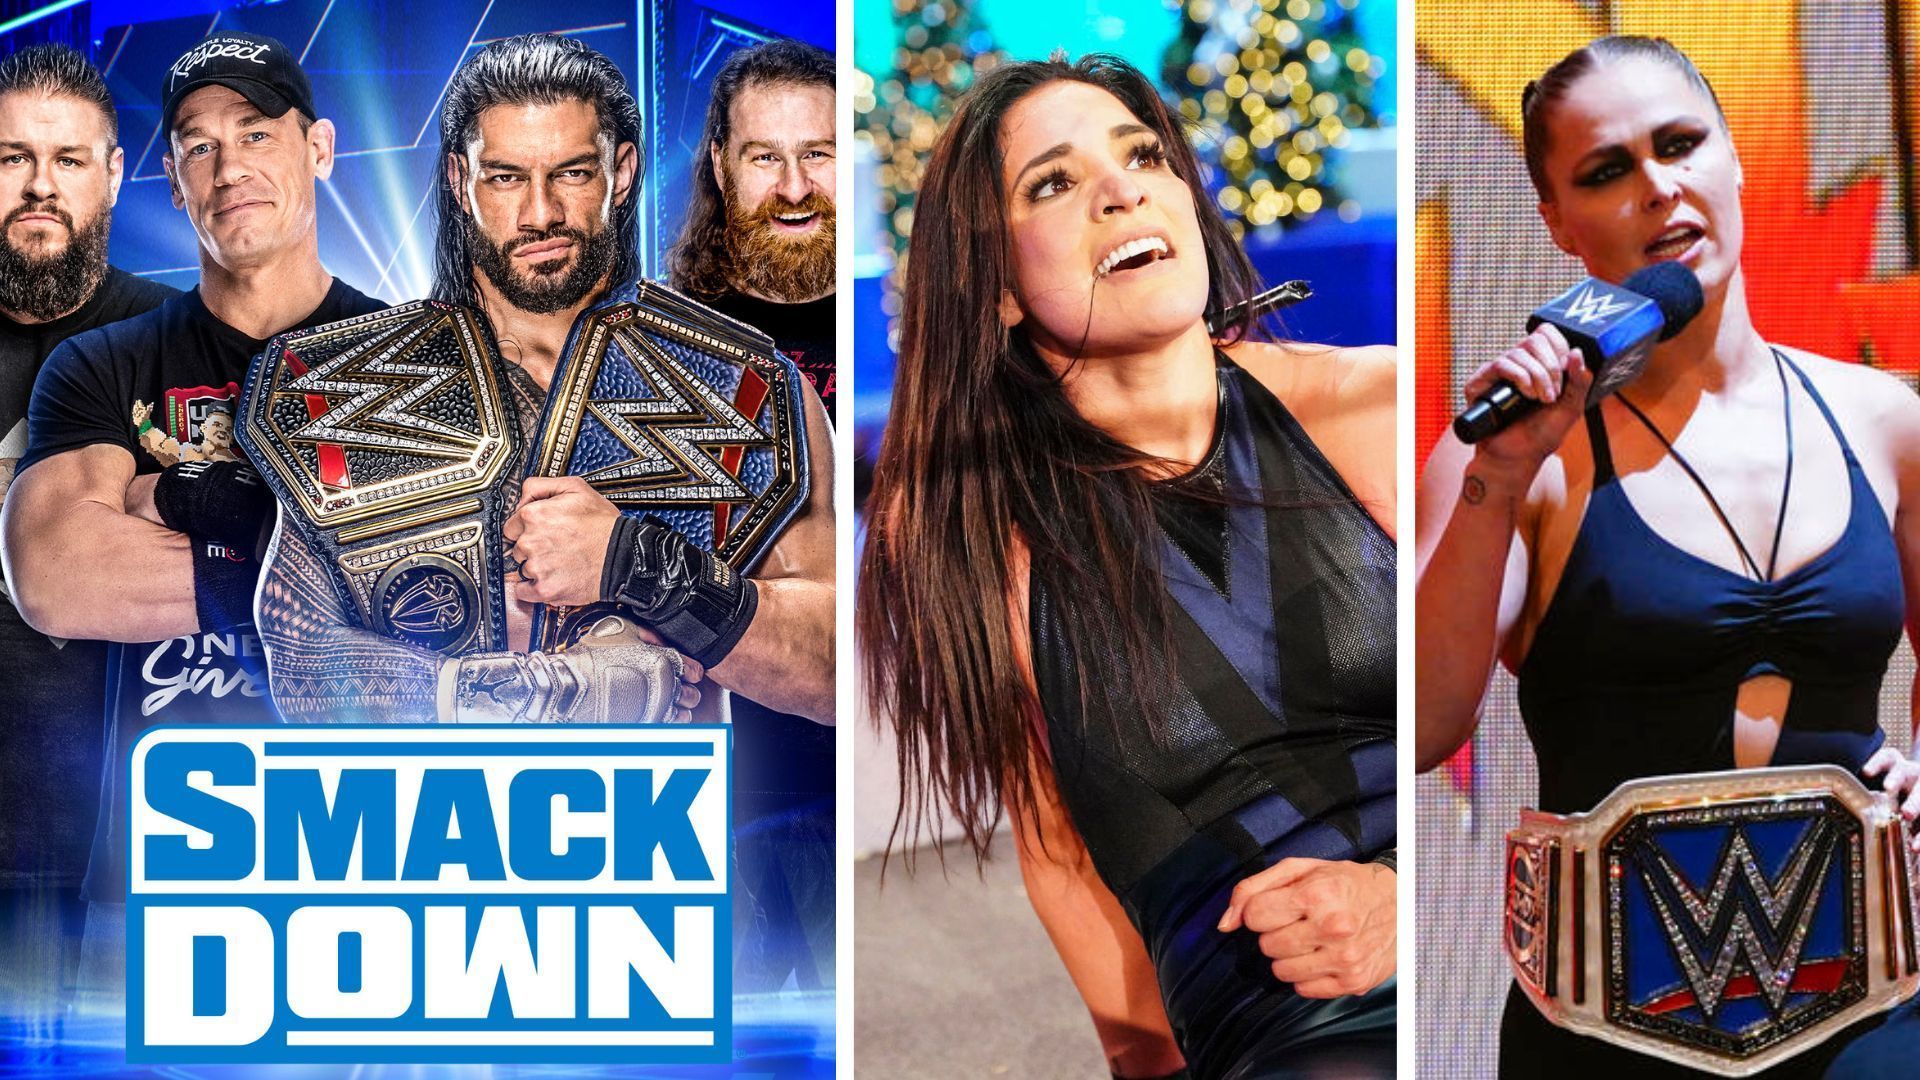 This Friday is the final episode of WWE SmackDown this year